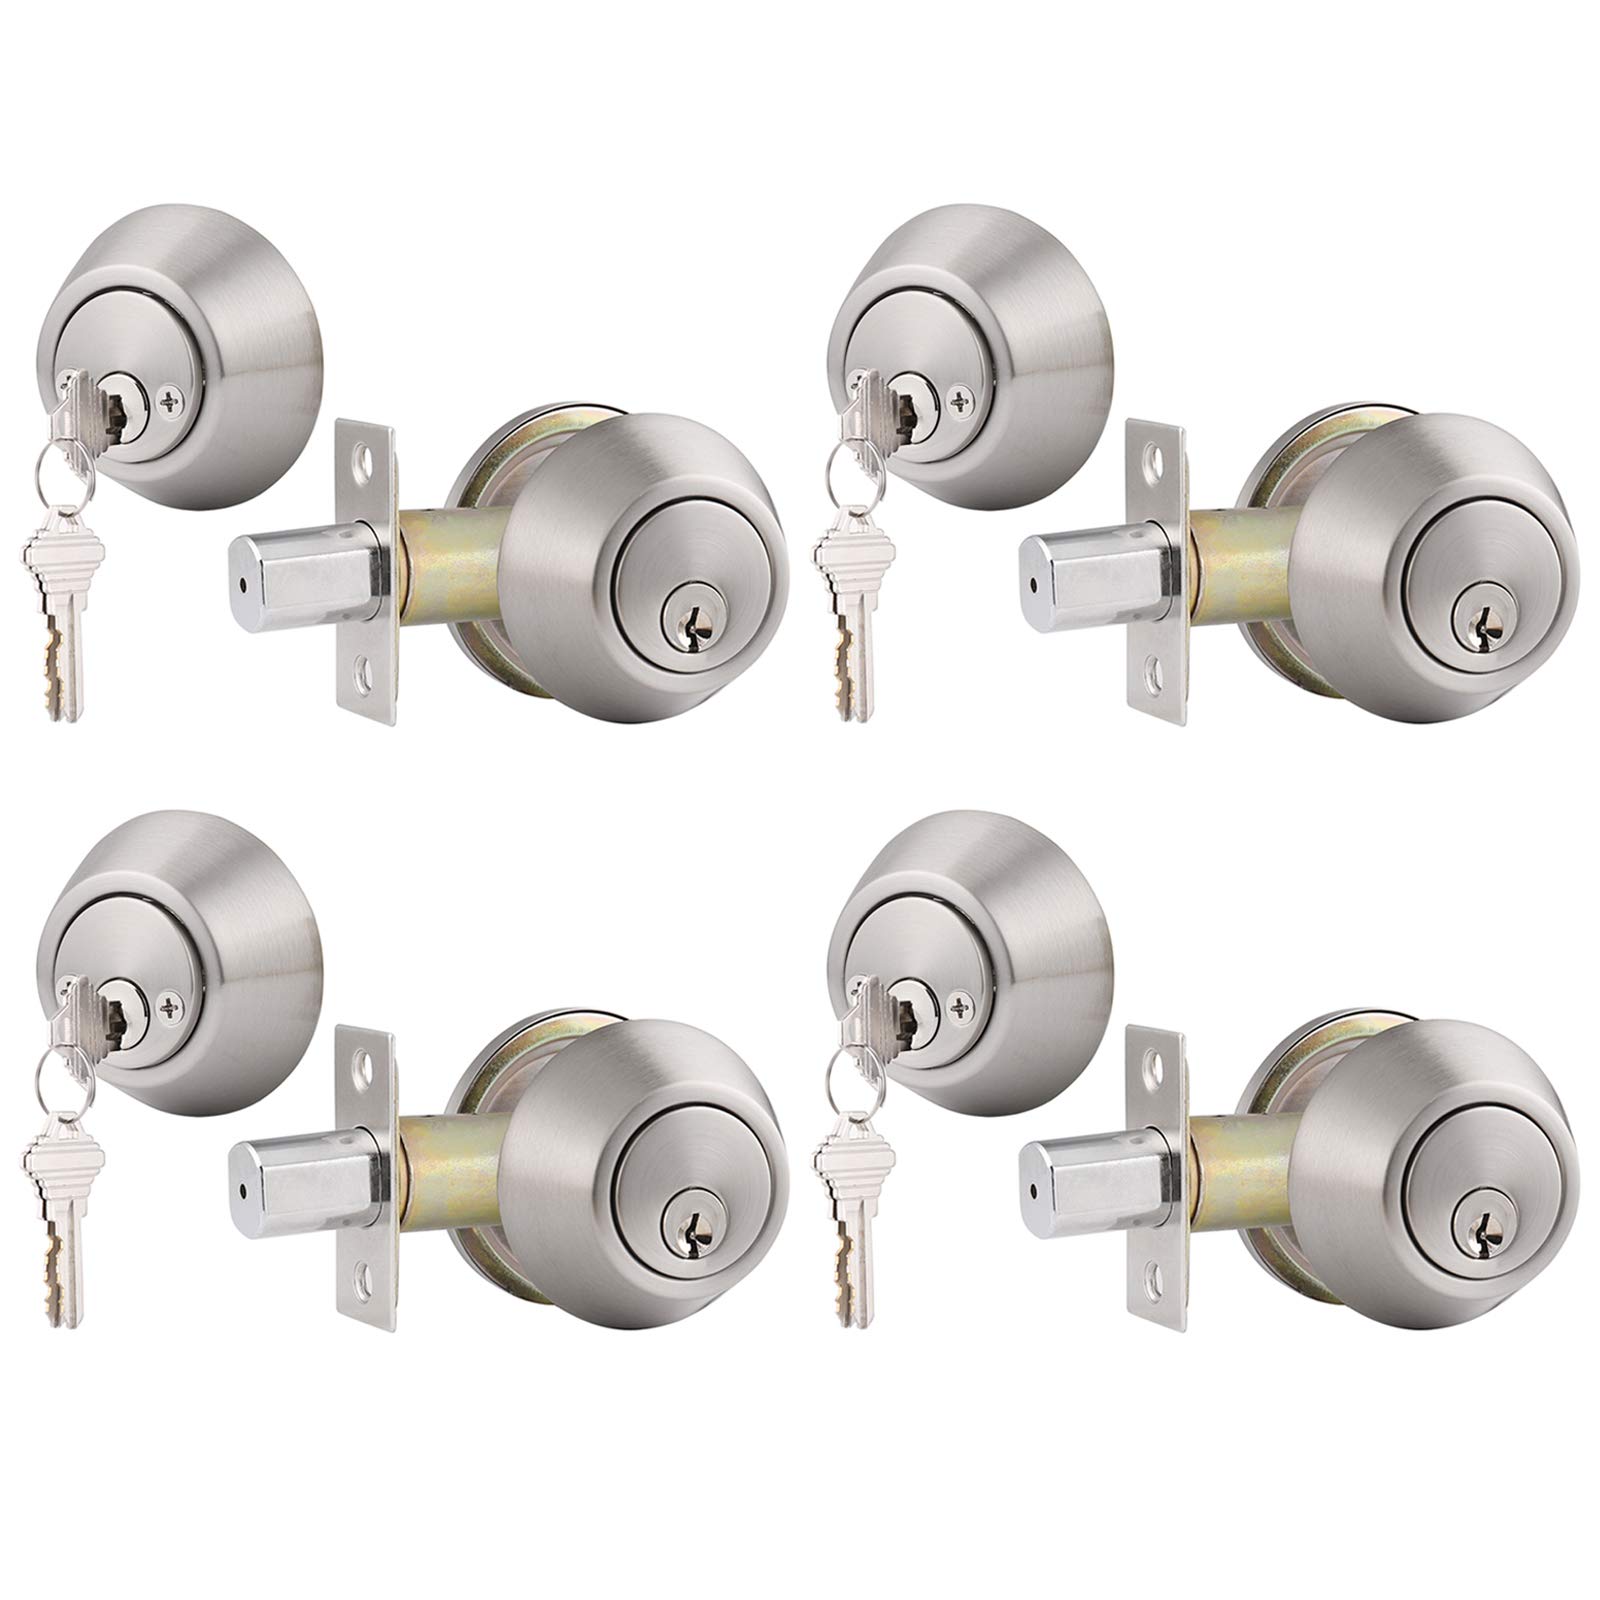 Gobrico Double Cylinder Deadbolts Keyed on Both Side with Same Key in Satin Nickel 4 Pack Door Locks with Same Key for Entry Doo